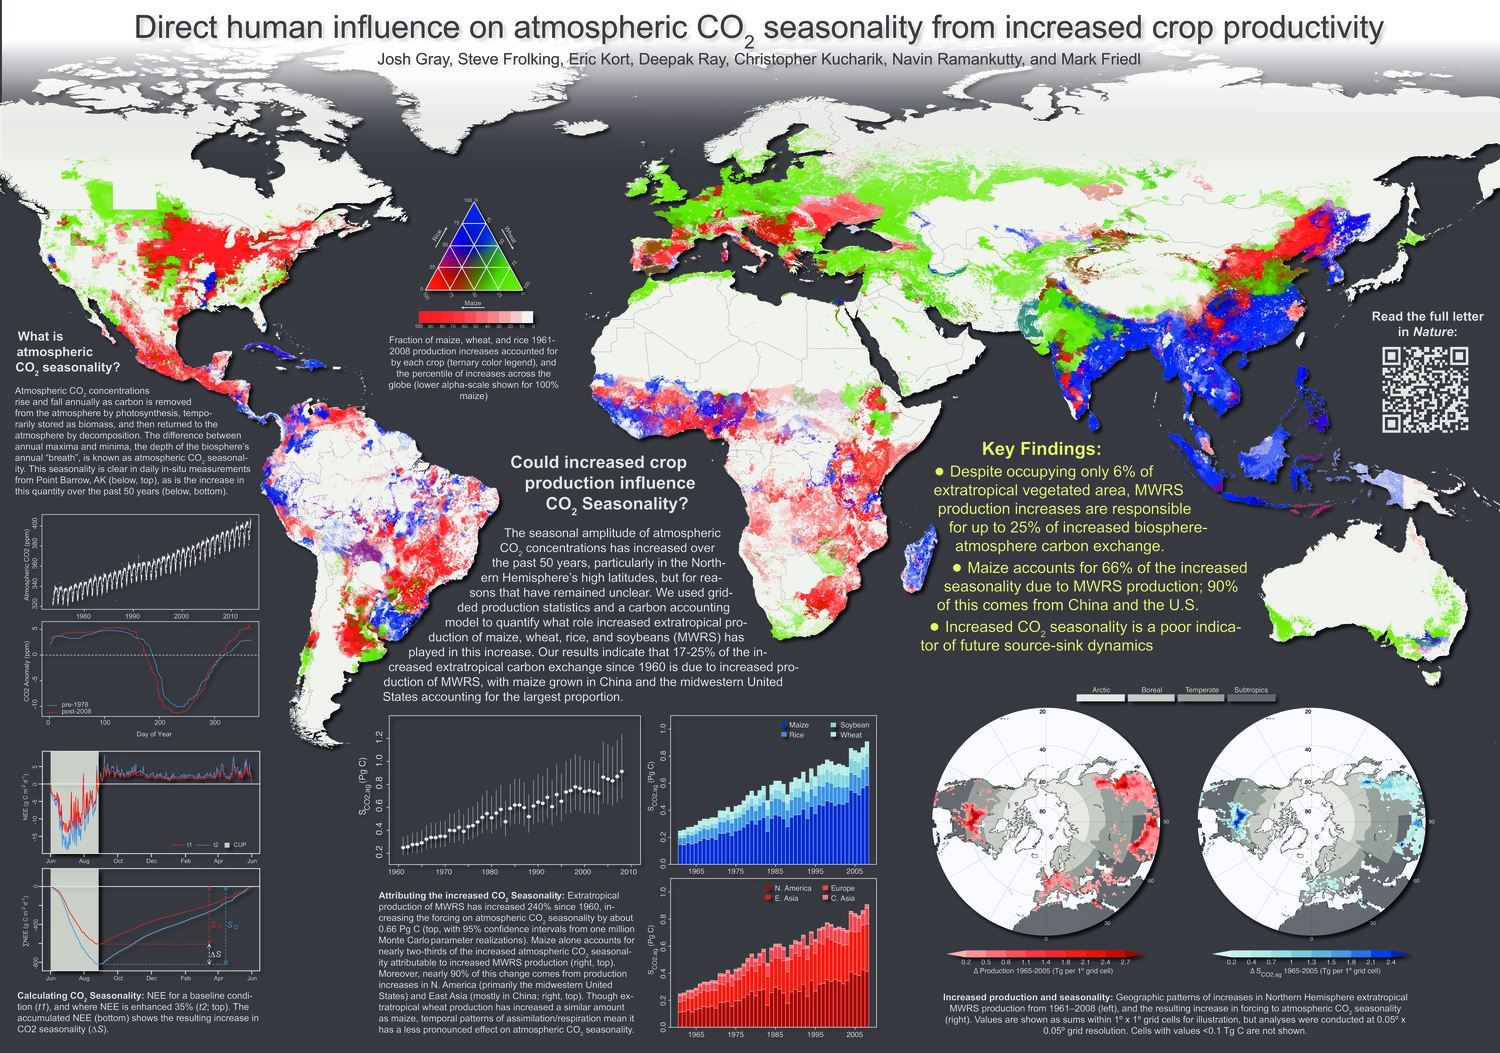 Direct Human Influence On Atmospheric Co2 Seasonality From Increased Crop Productivity by frolking